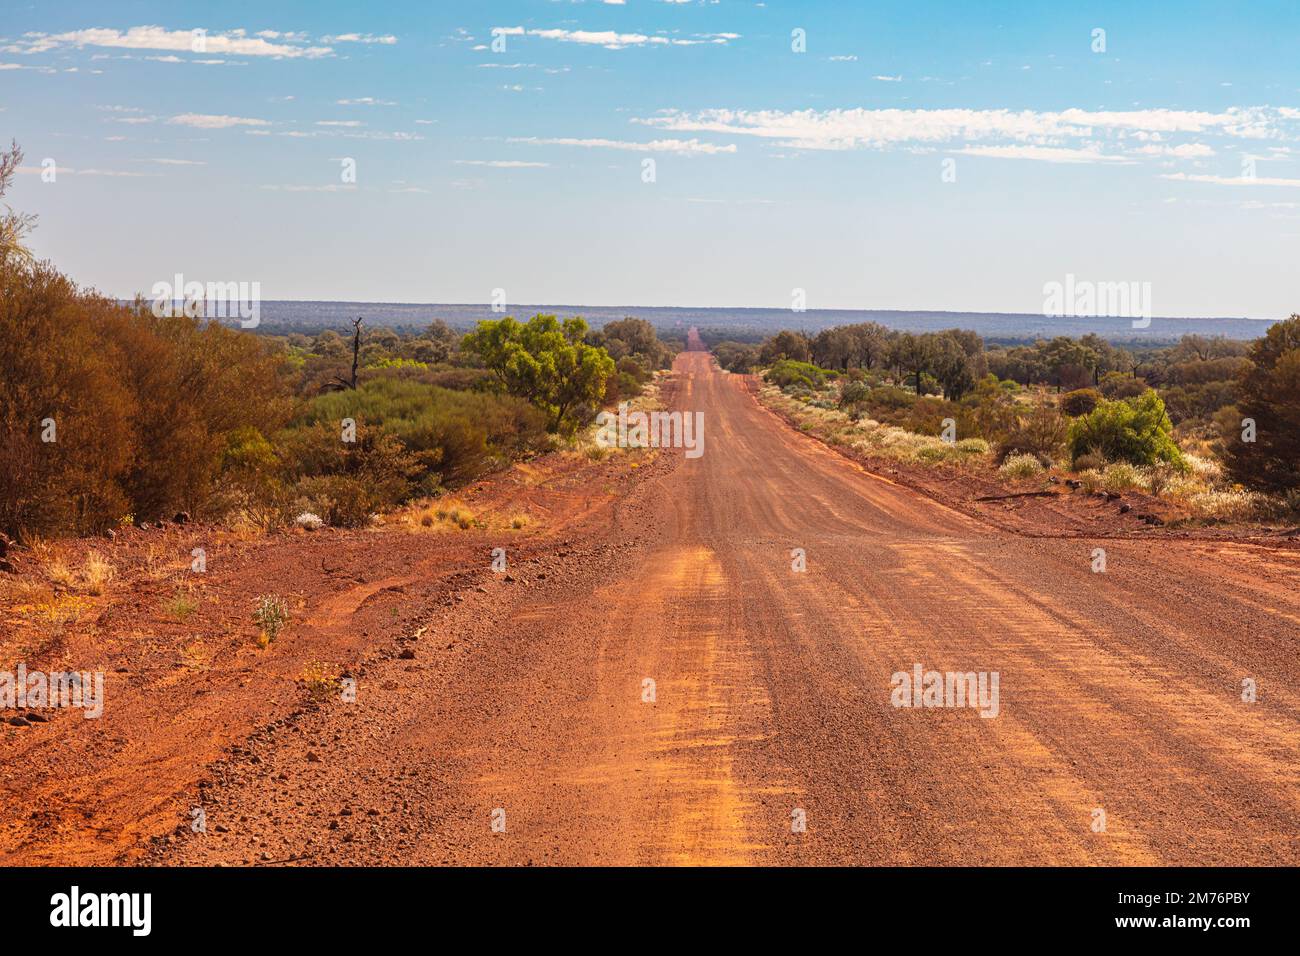 Unpaved road from Kings Canyon to Alice Springs near the Ginty's Lookout. Endless vast landscape with barren vegetation on thousands of kilometers in Stock Photo